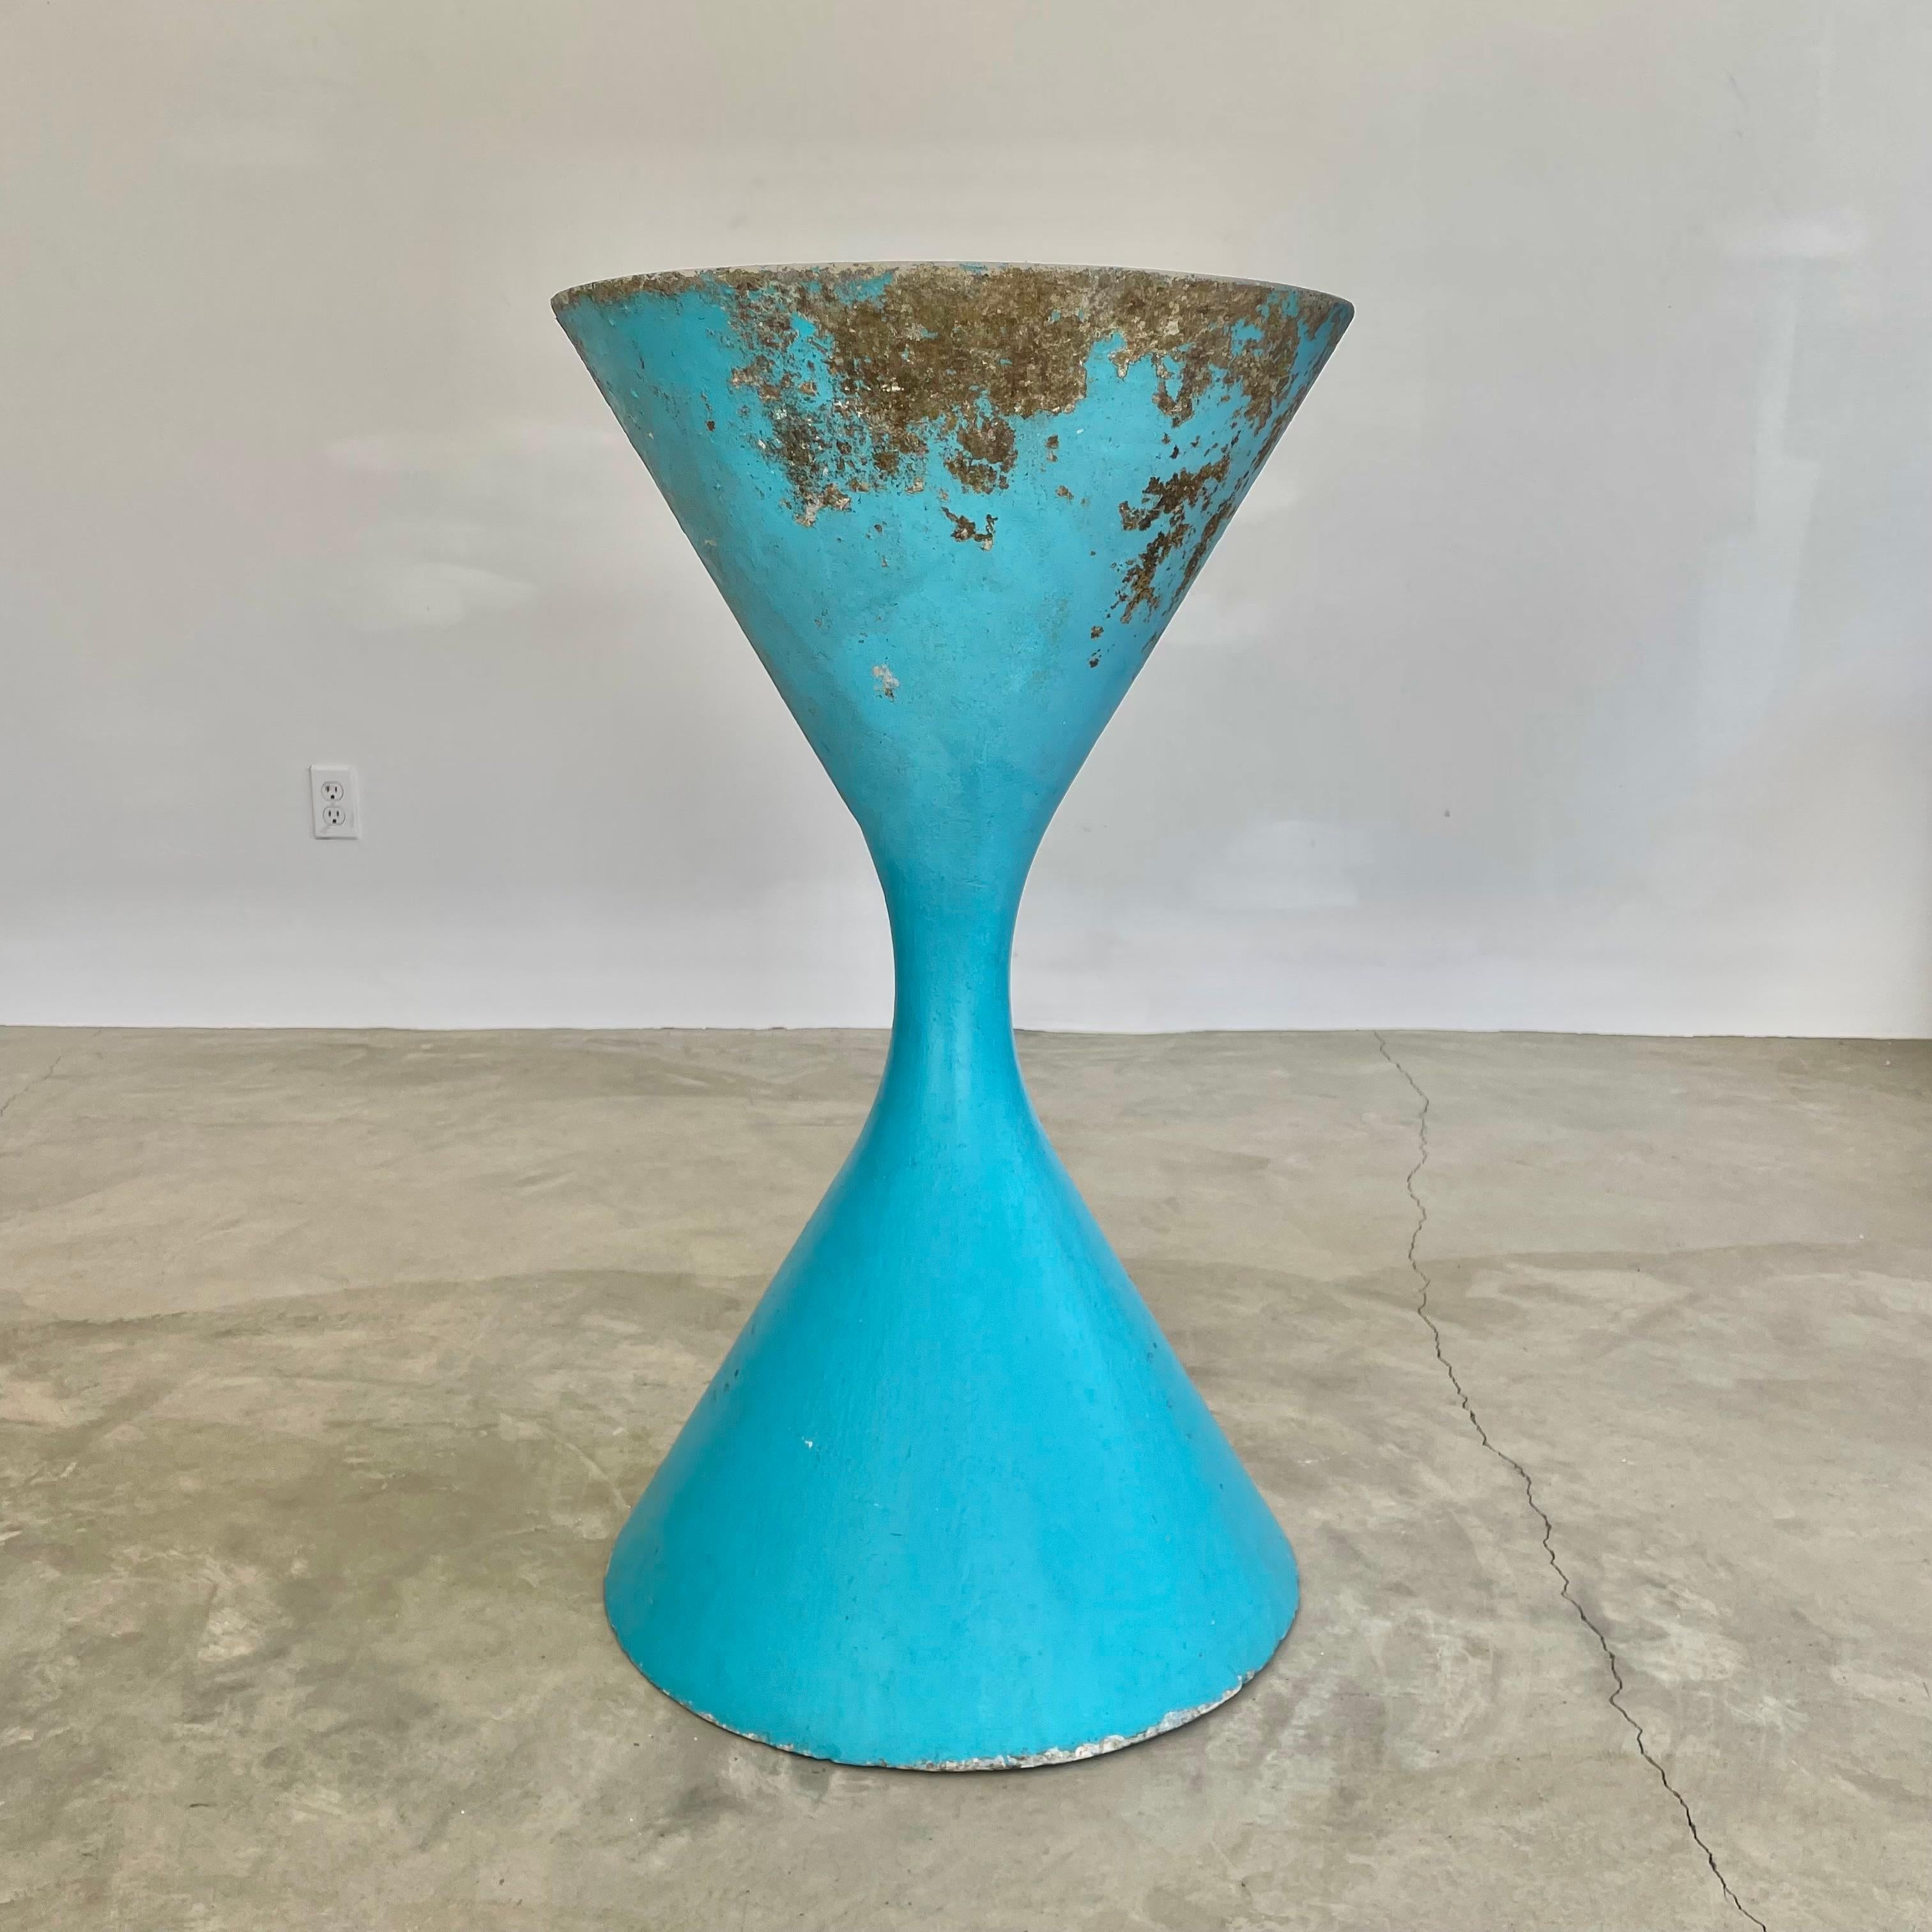 Concrete diabolo planter by Swiss Designer Willy Guhl. Stunning electric turquoise color with amazing patina around the brim. 
Located at our LA Showroom.

*Other sizes and colors available in separate listings.
 
Extra large 37